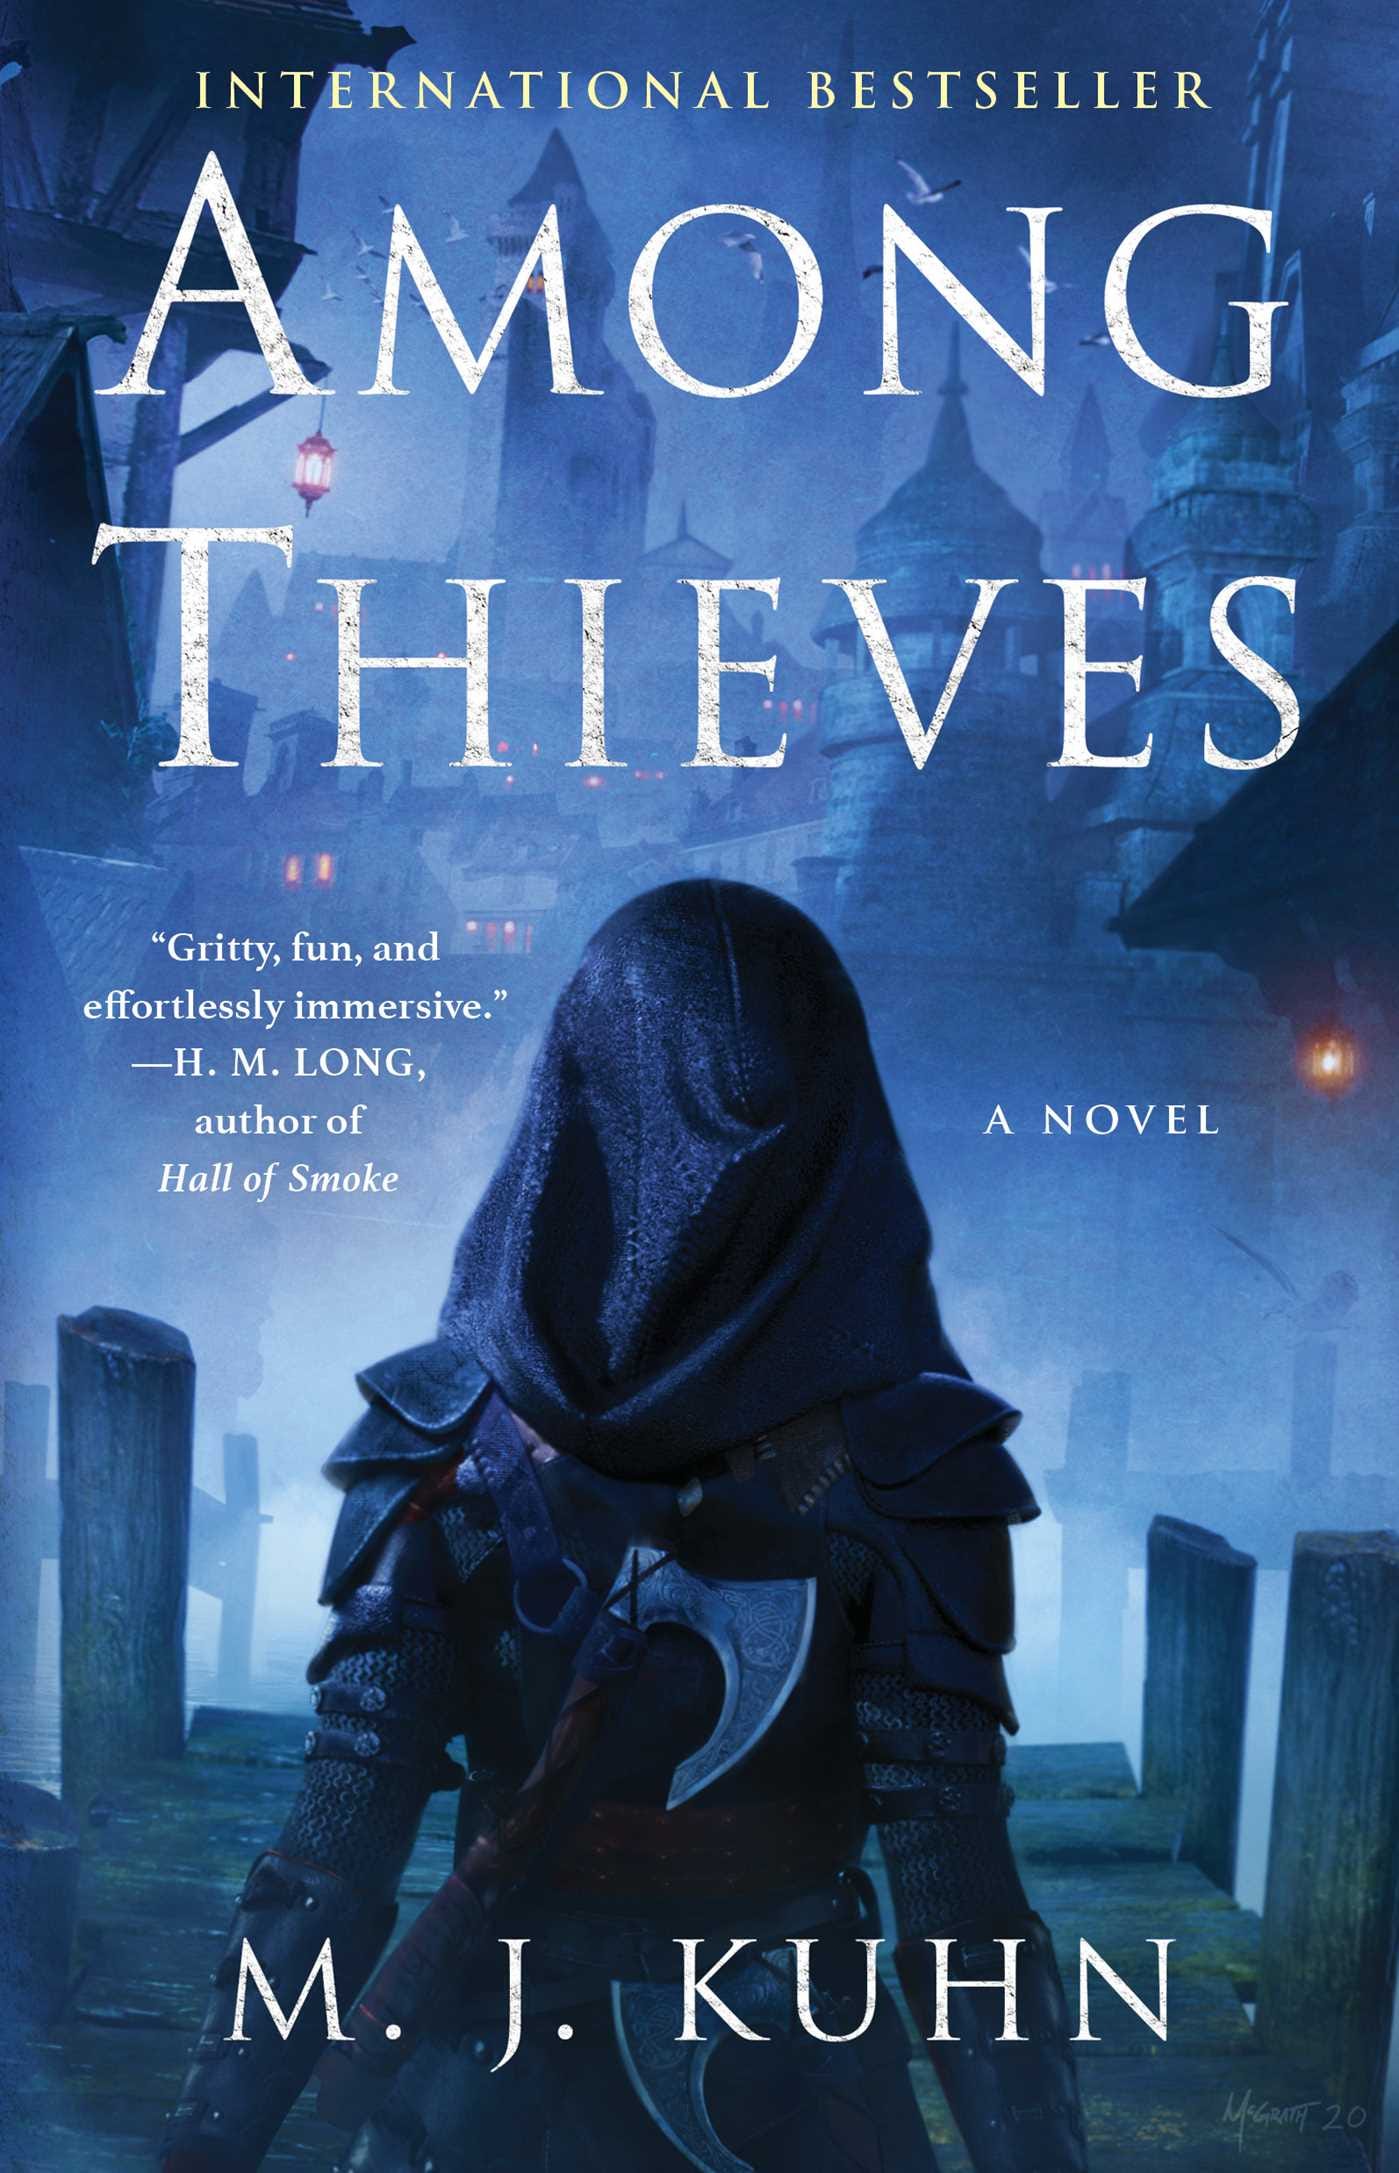 Blue book cover reading: International Best, Among Thieves, A Novel, MJ Kuhn. With the back of a figure strapped with axes. Quote by HM Long.